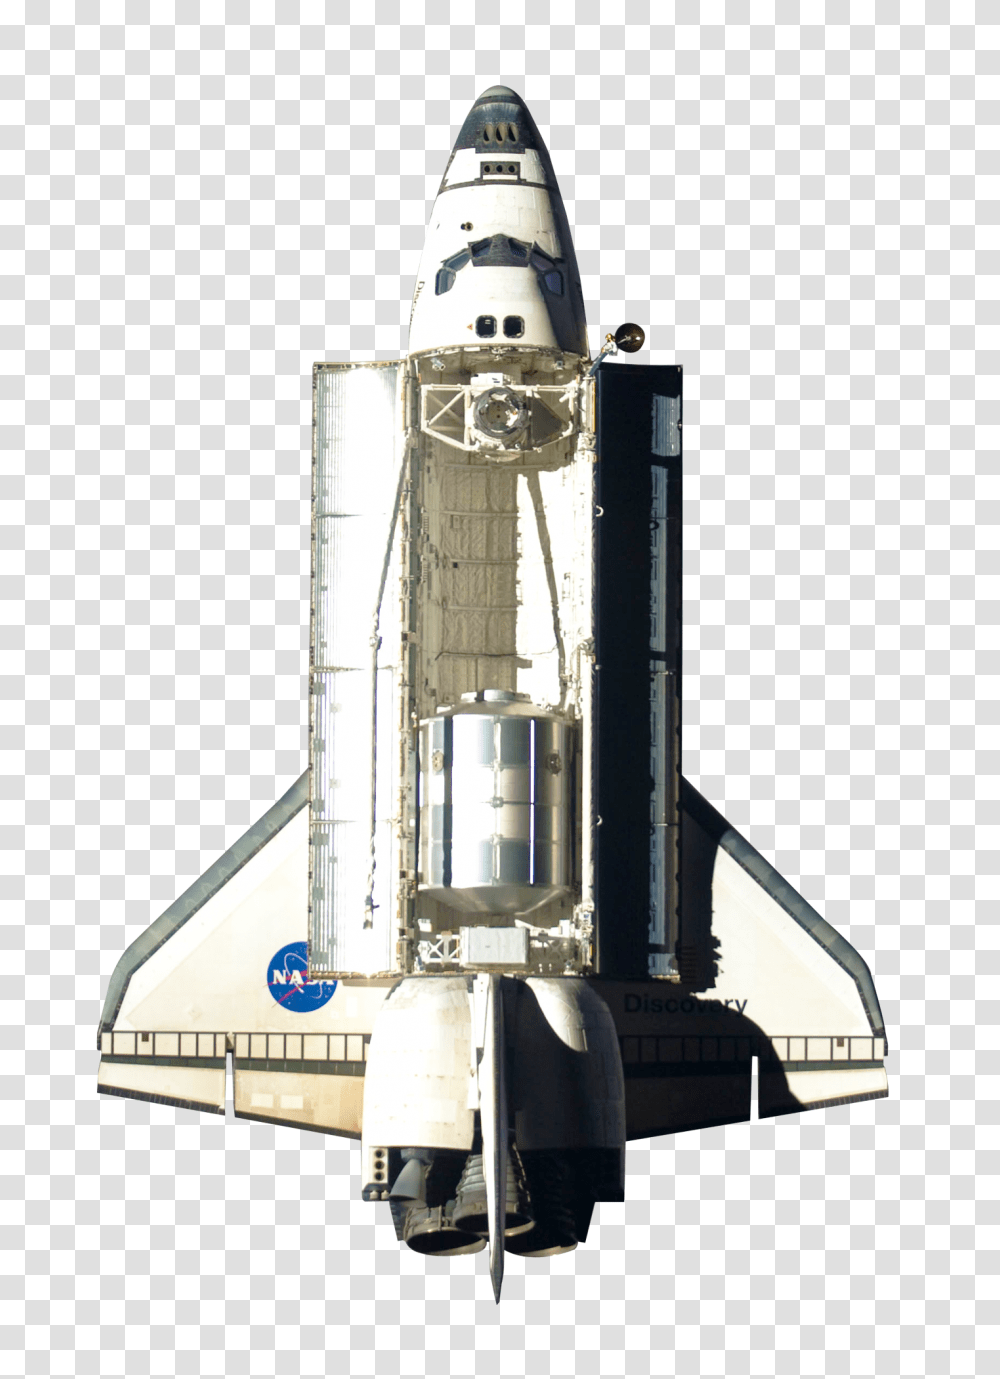 Download Space Free Image And Clipart Space Rocket, Spaceship, Aircraft, Vehicle, Transportation Transparent Png